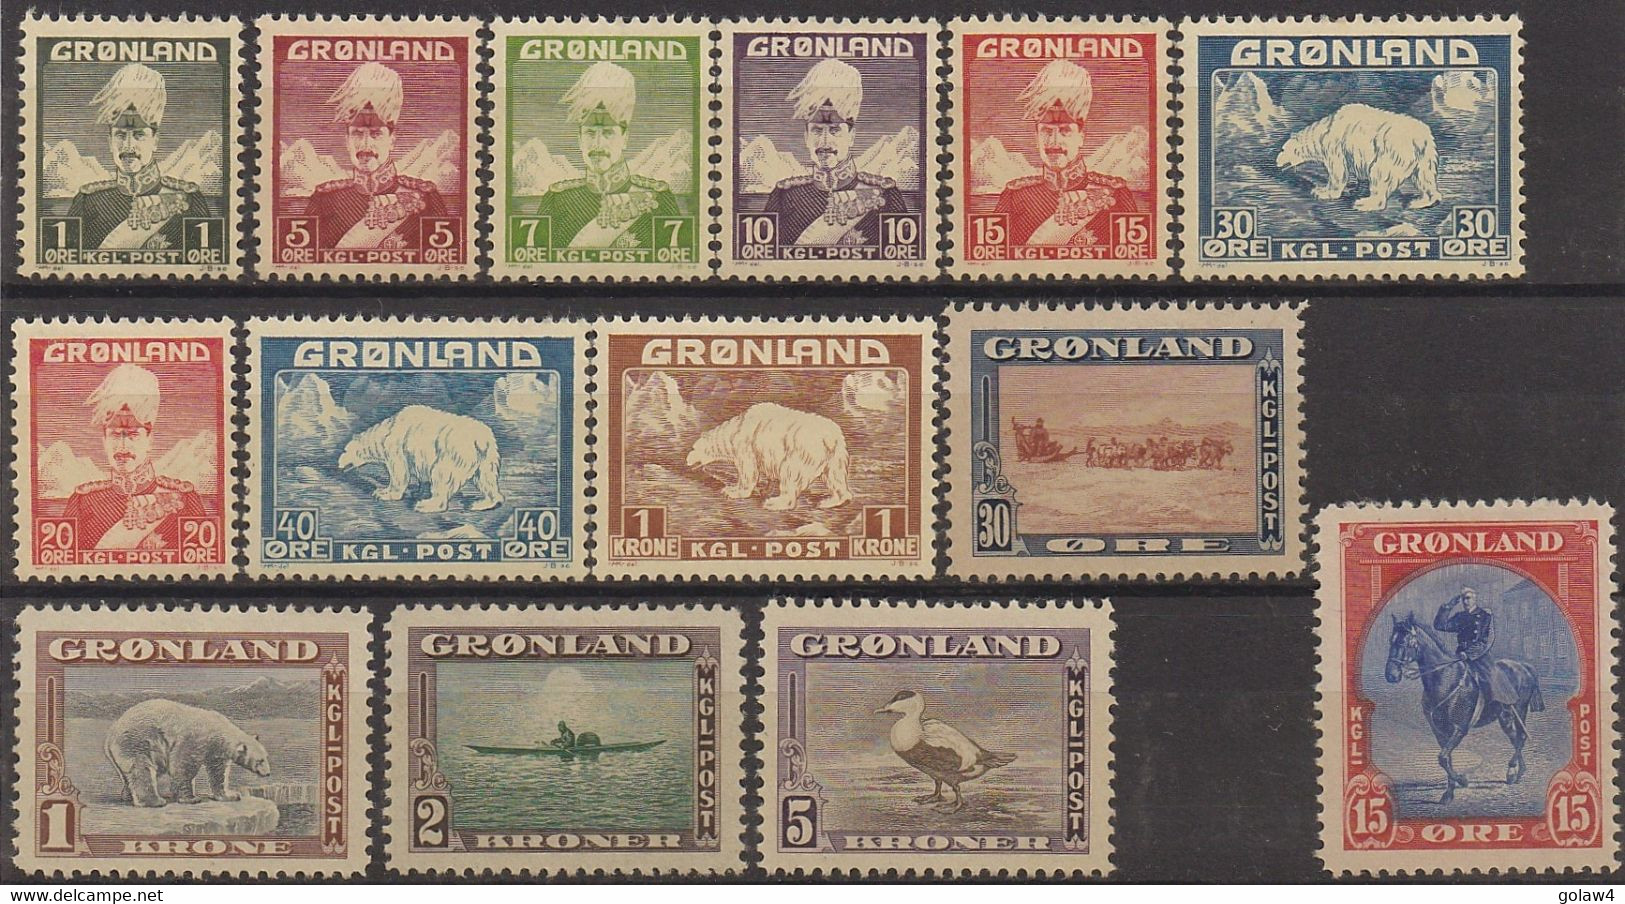 31220# GROENLAND LOT TIMBRES * Entre N° 1 & 18 * CHARNIERES PROPRES Cote 200 Euros - Lots & Serien